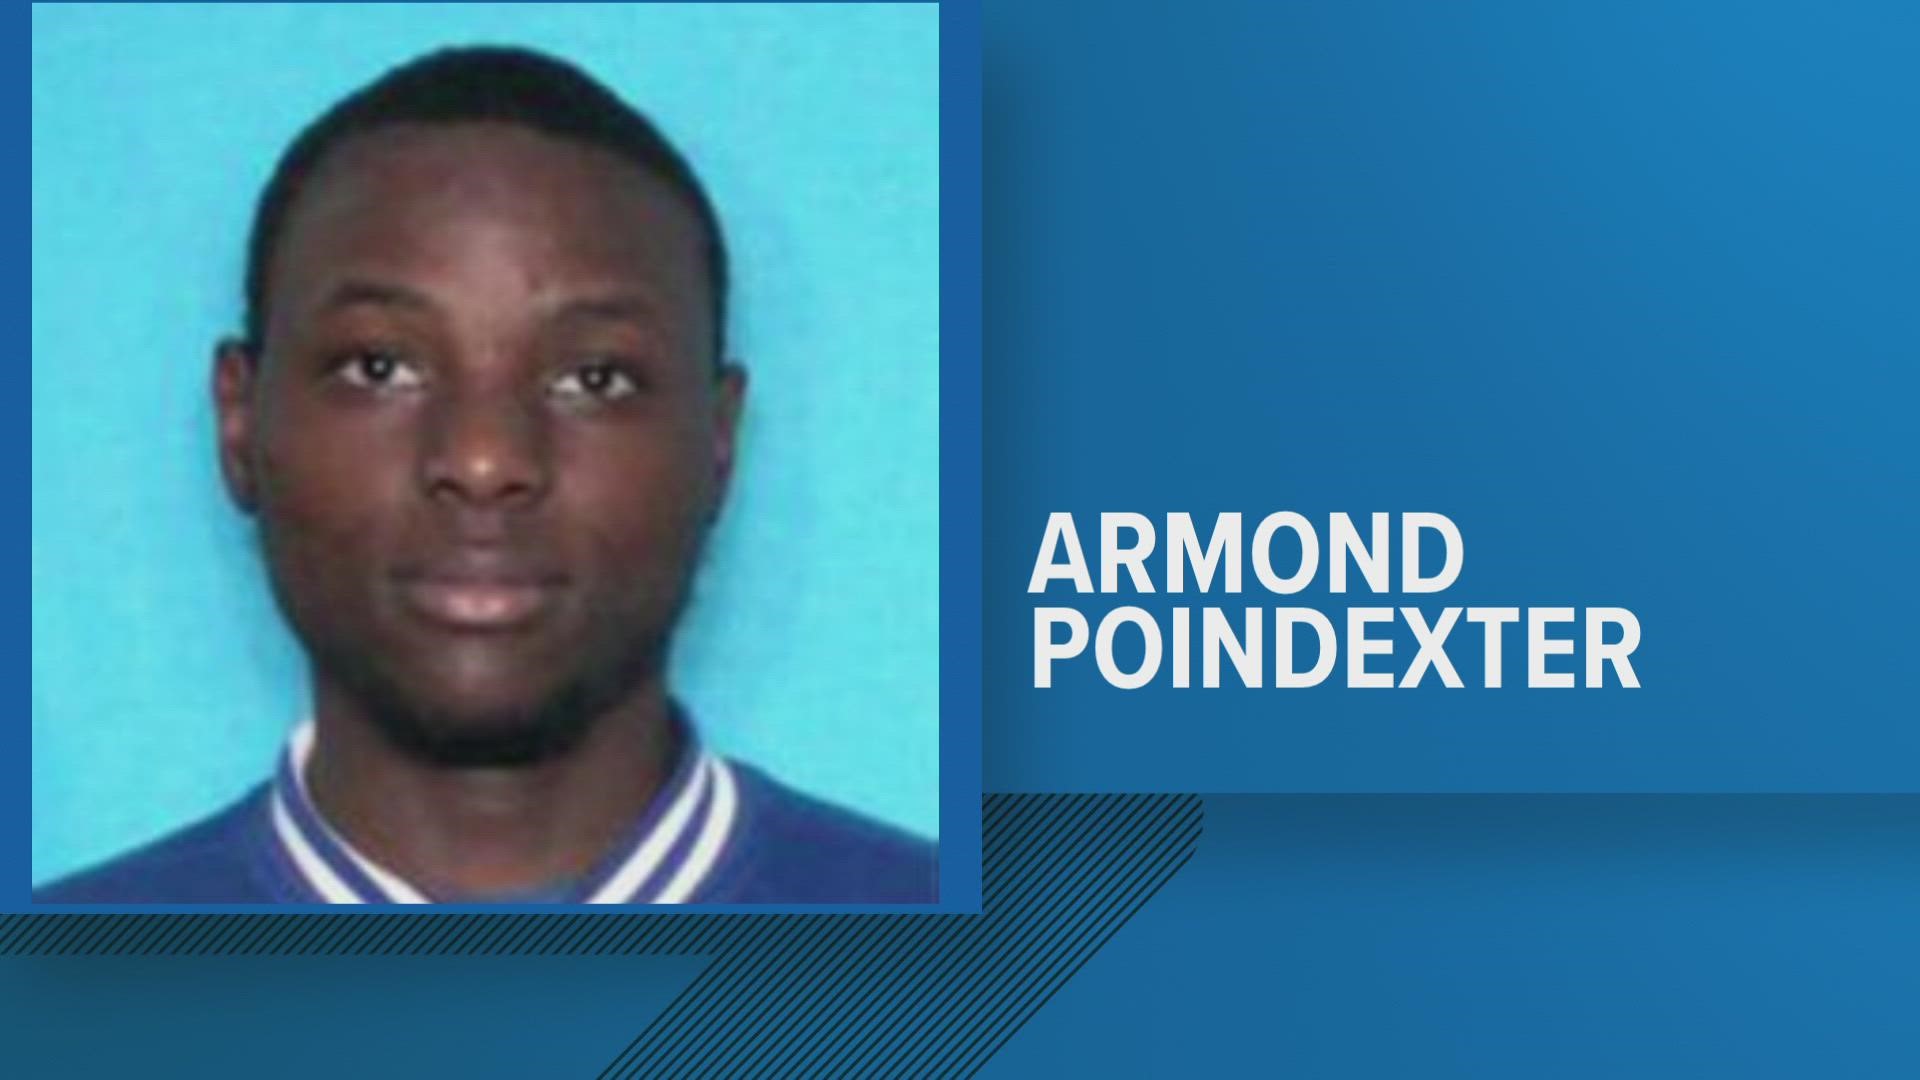 Armond Poindexter faces counts of aggravated assault with a firearm and home invasion, deputies said.